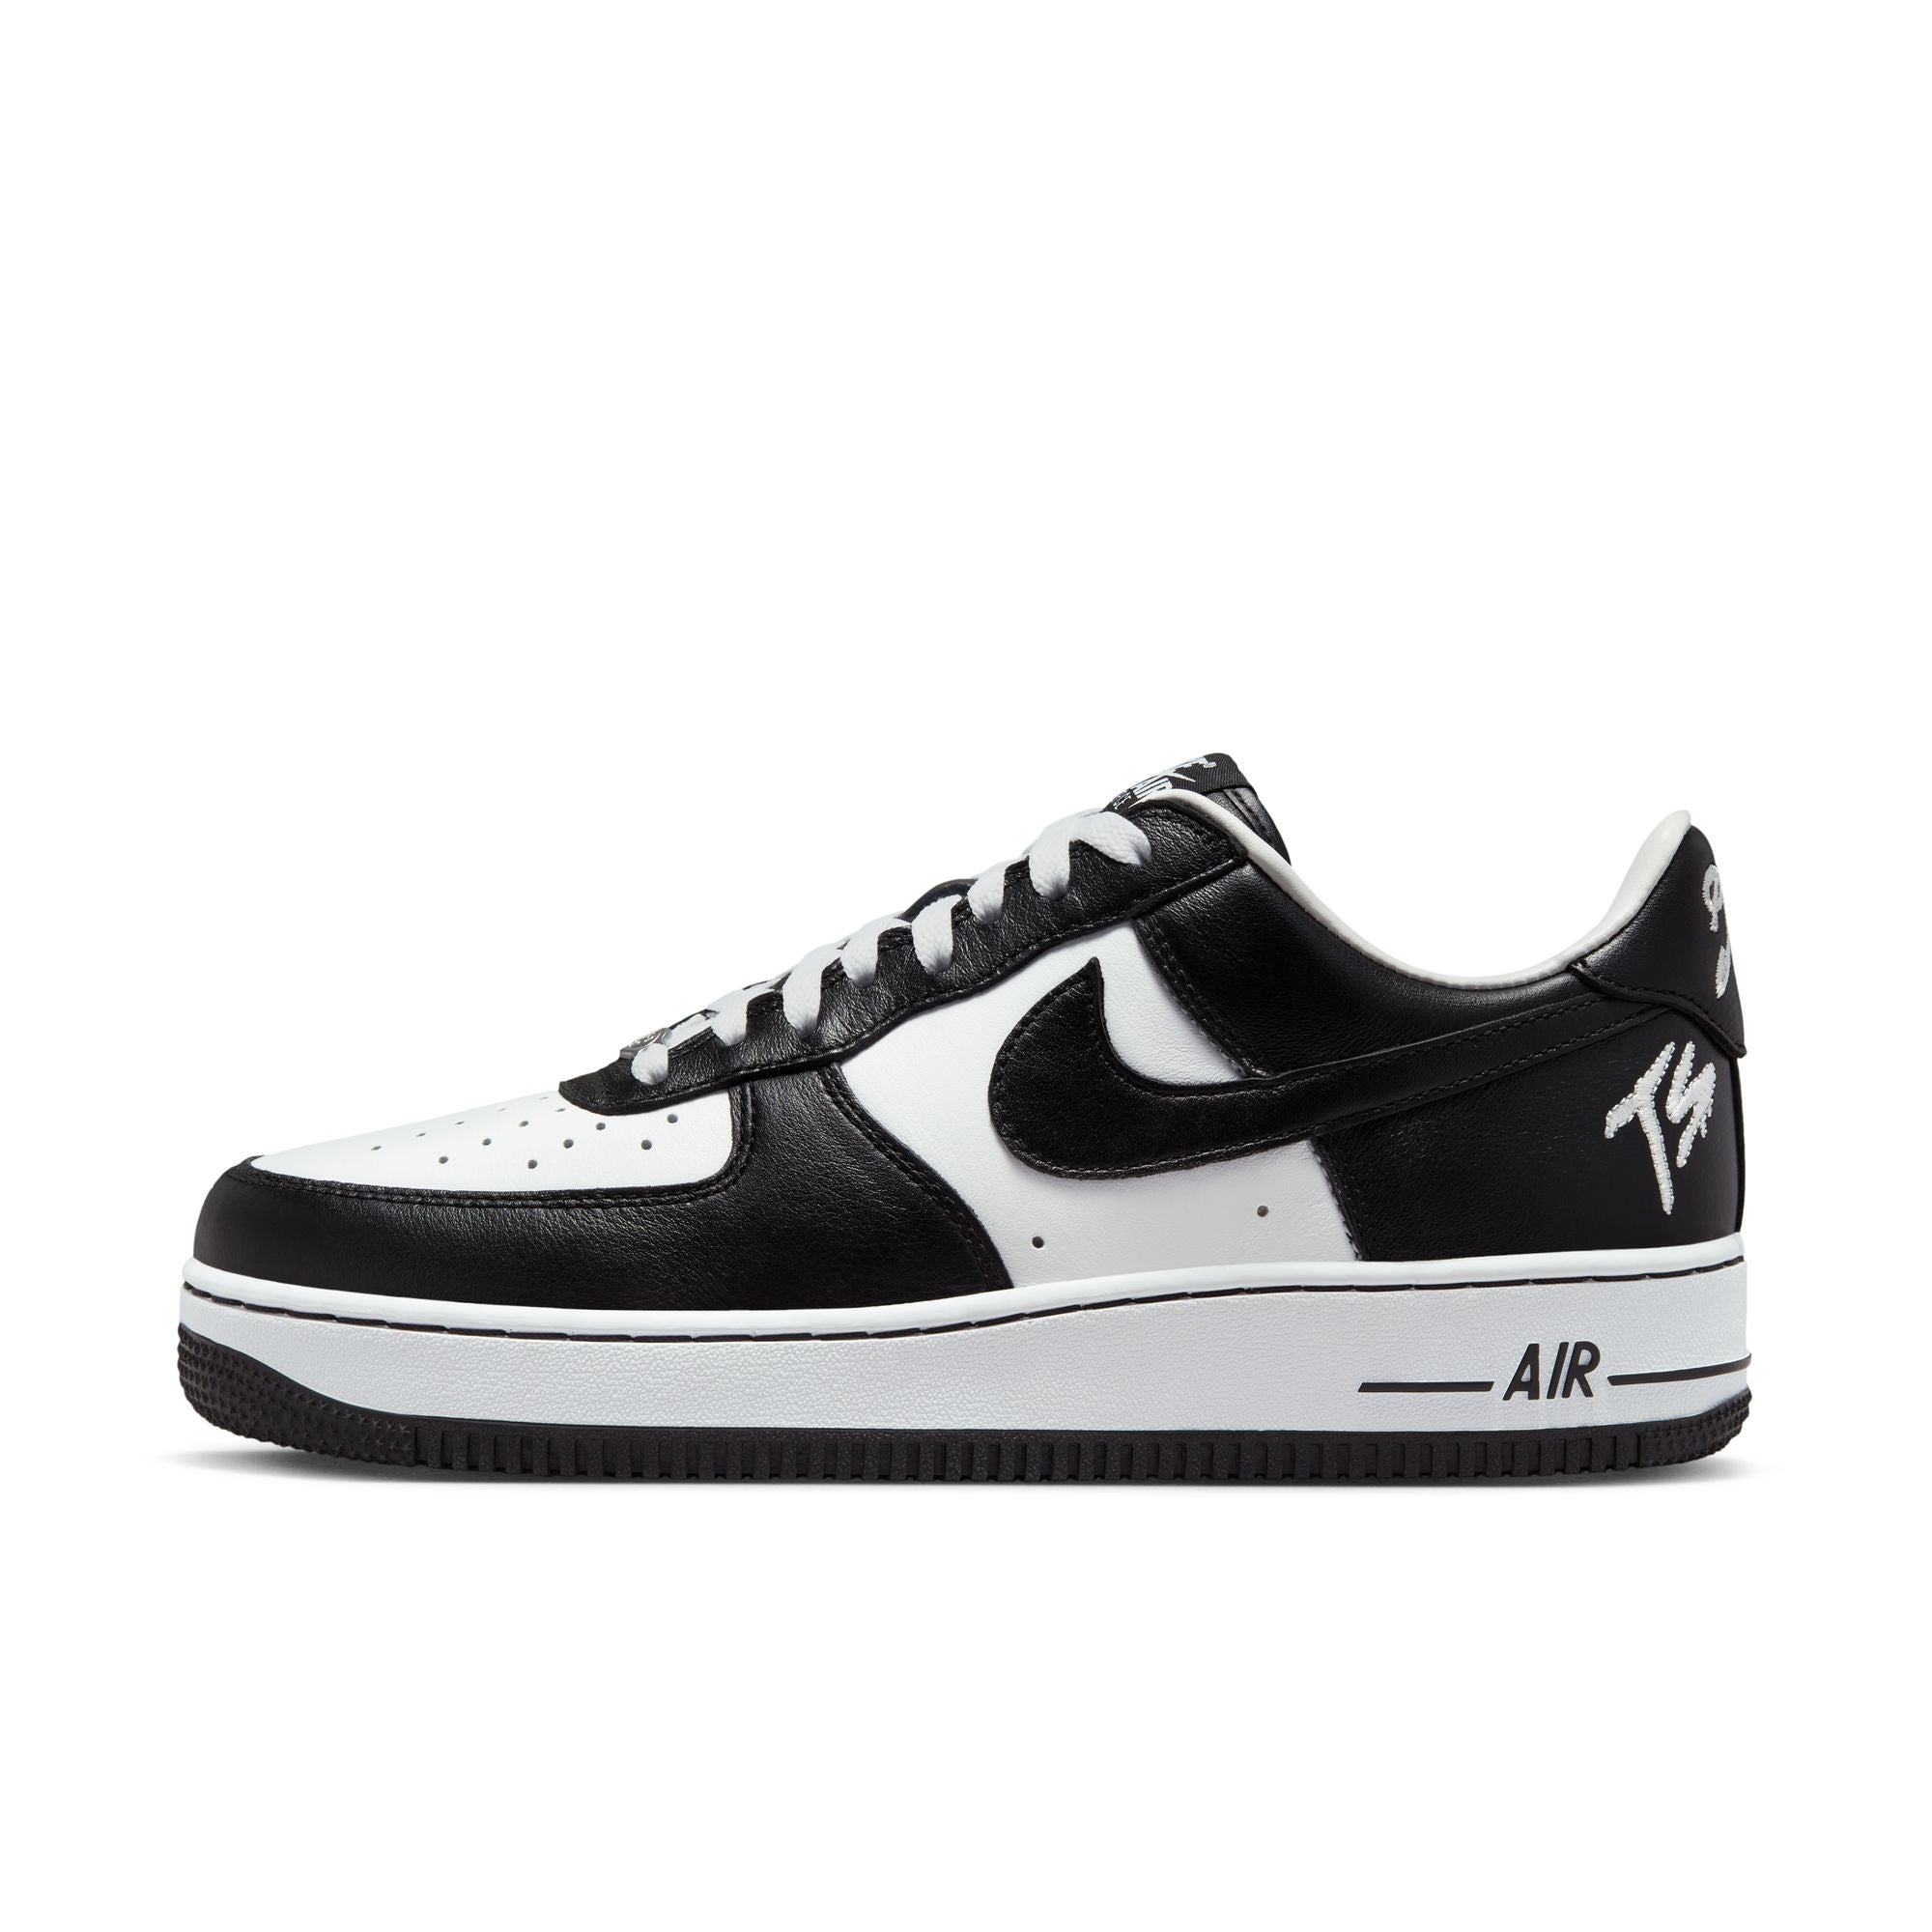 AIR FORCE 1 LOW QS TS – Laced.